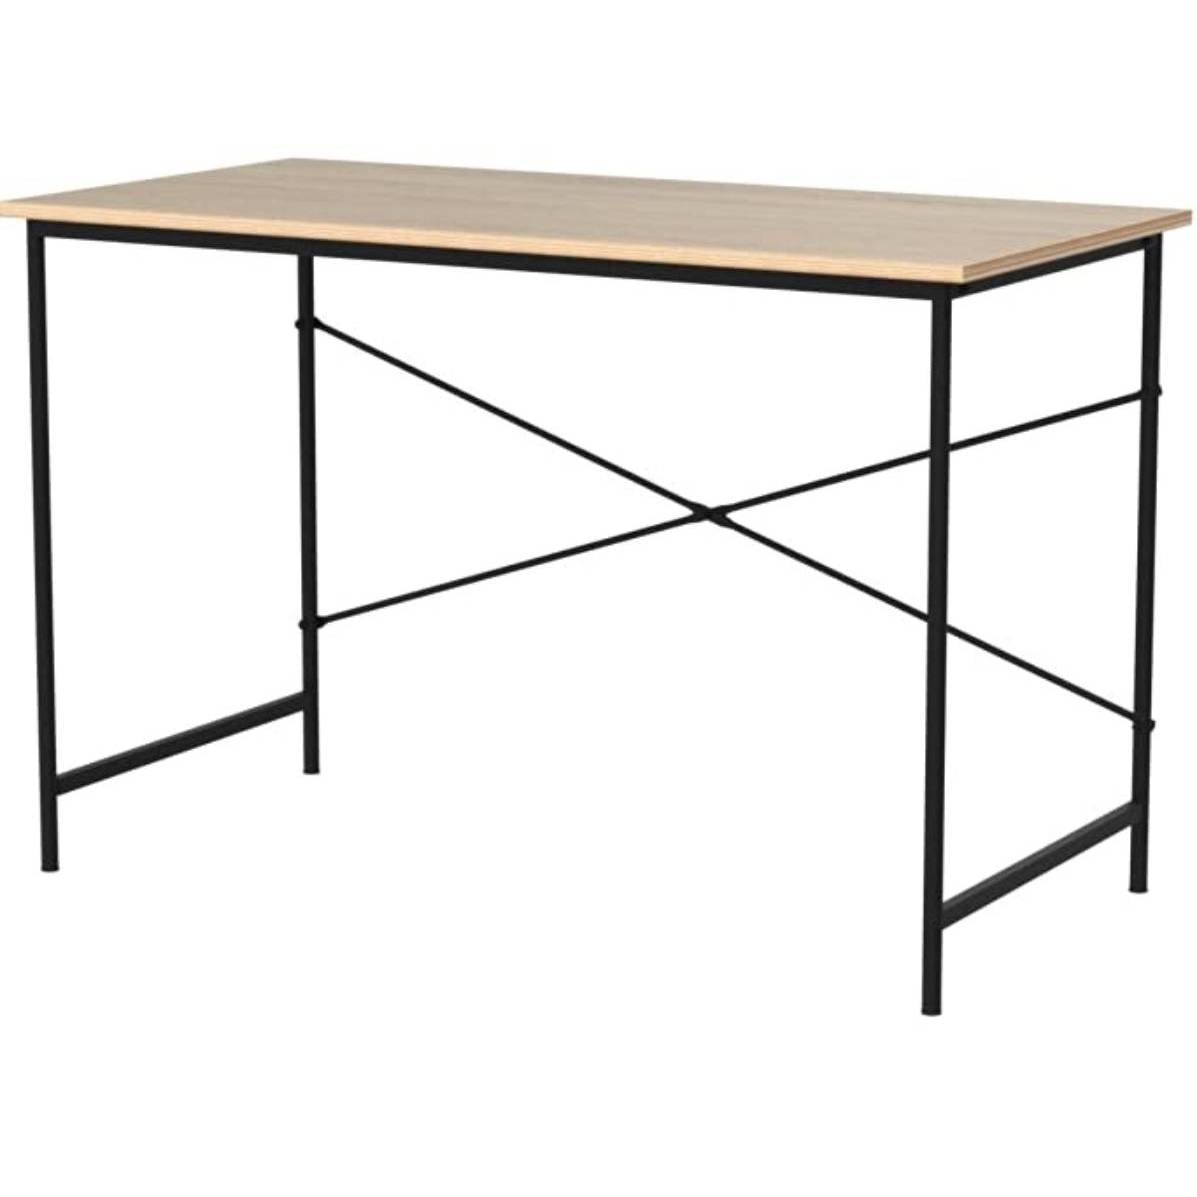 Modern Home Office Computer Desk Table with Black Metal Frame Wood Top in Oak